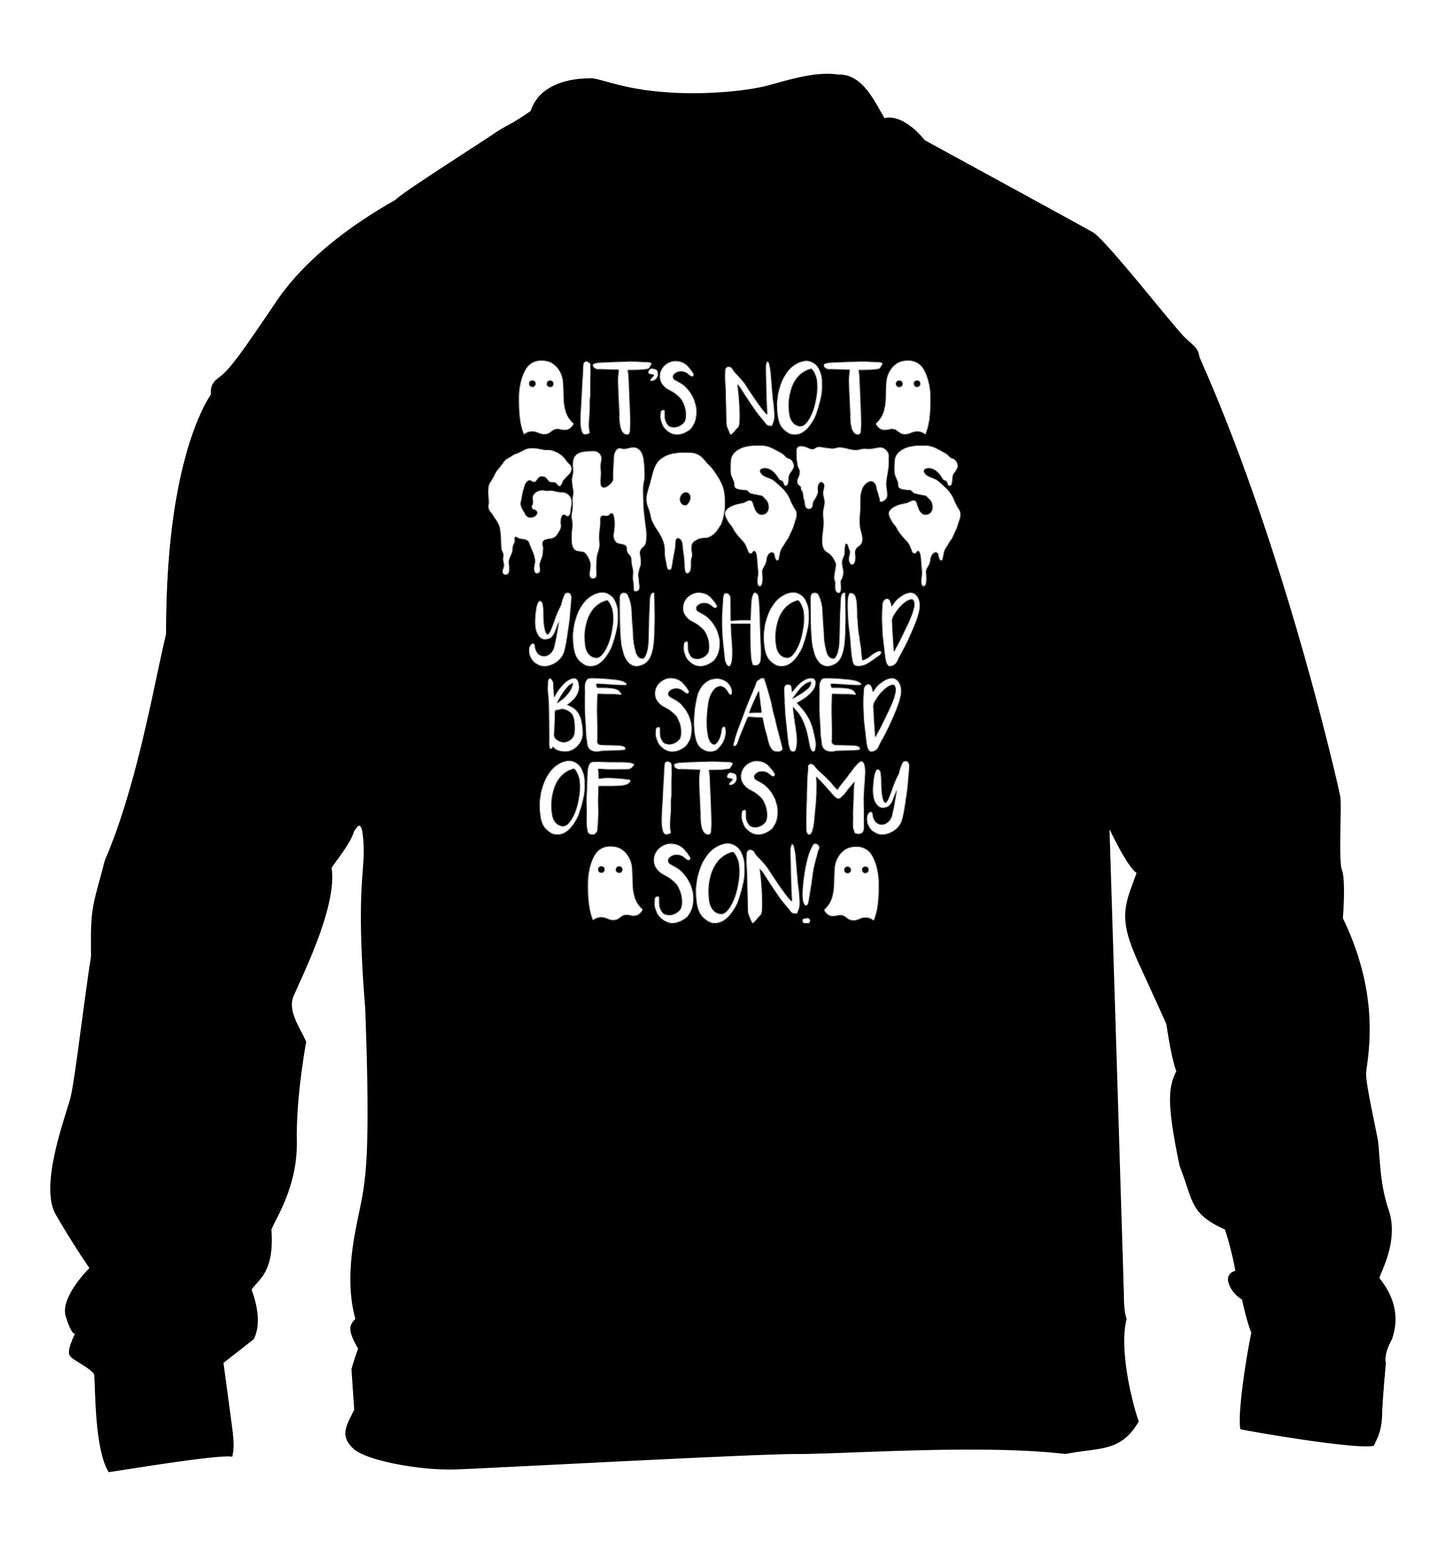 It's not ghosts you should be scared of it's my son! children's black sweater 12-14 Years